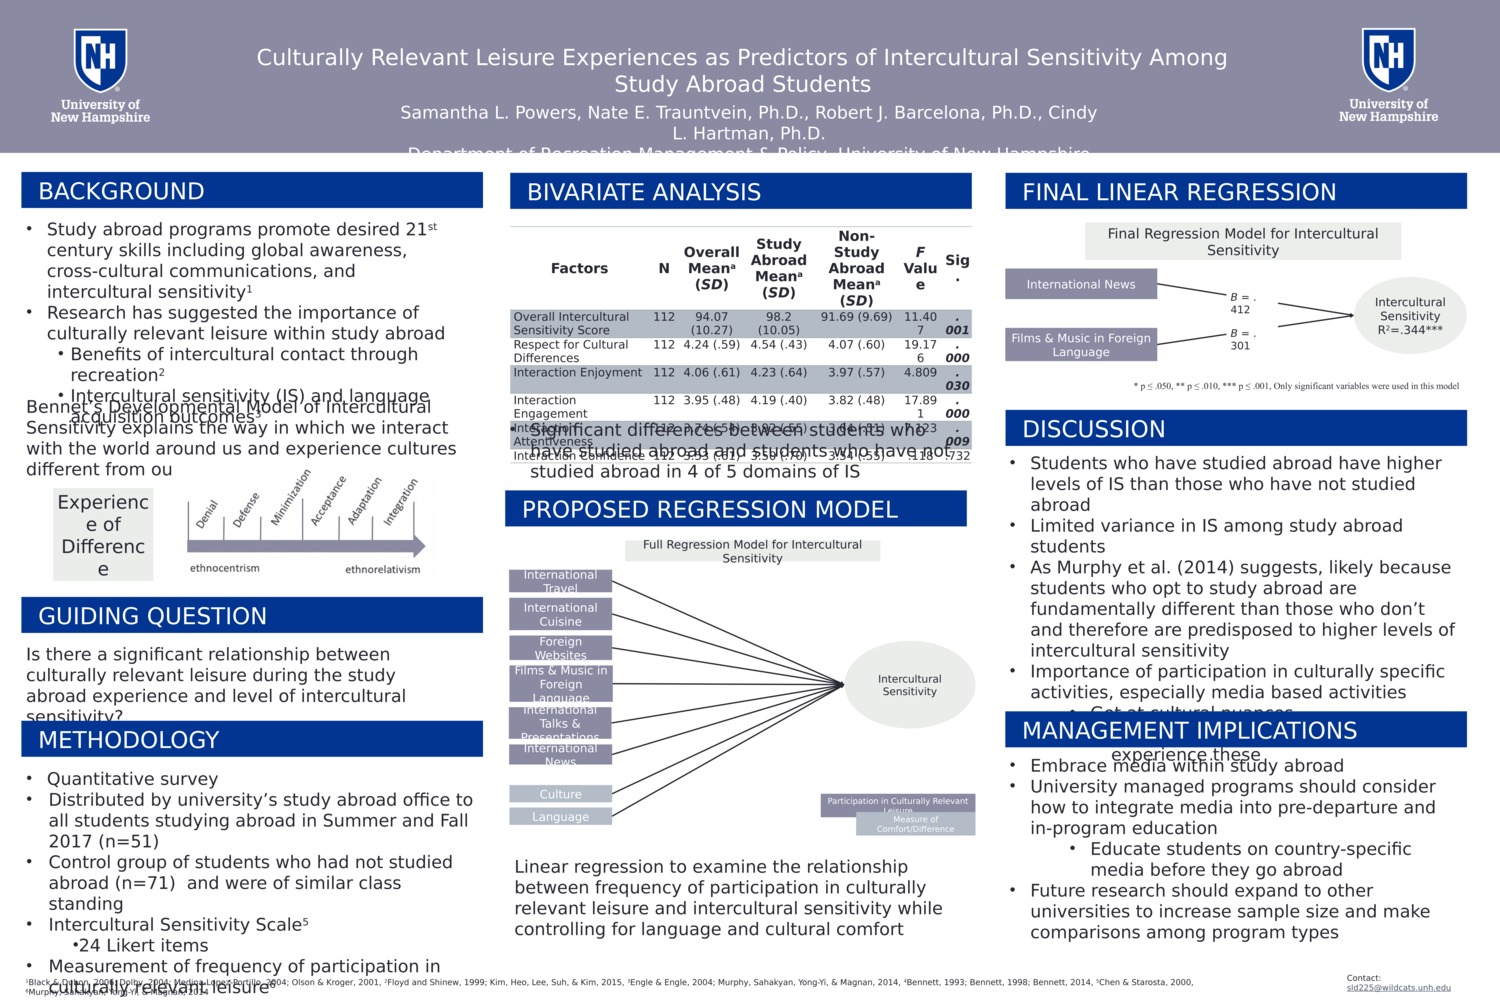 Culturally Relevant Leisure Experiences As Predictors Of Intercultural Sensitivity Among Study Abroad Students by sld225